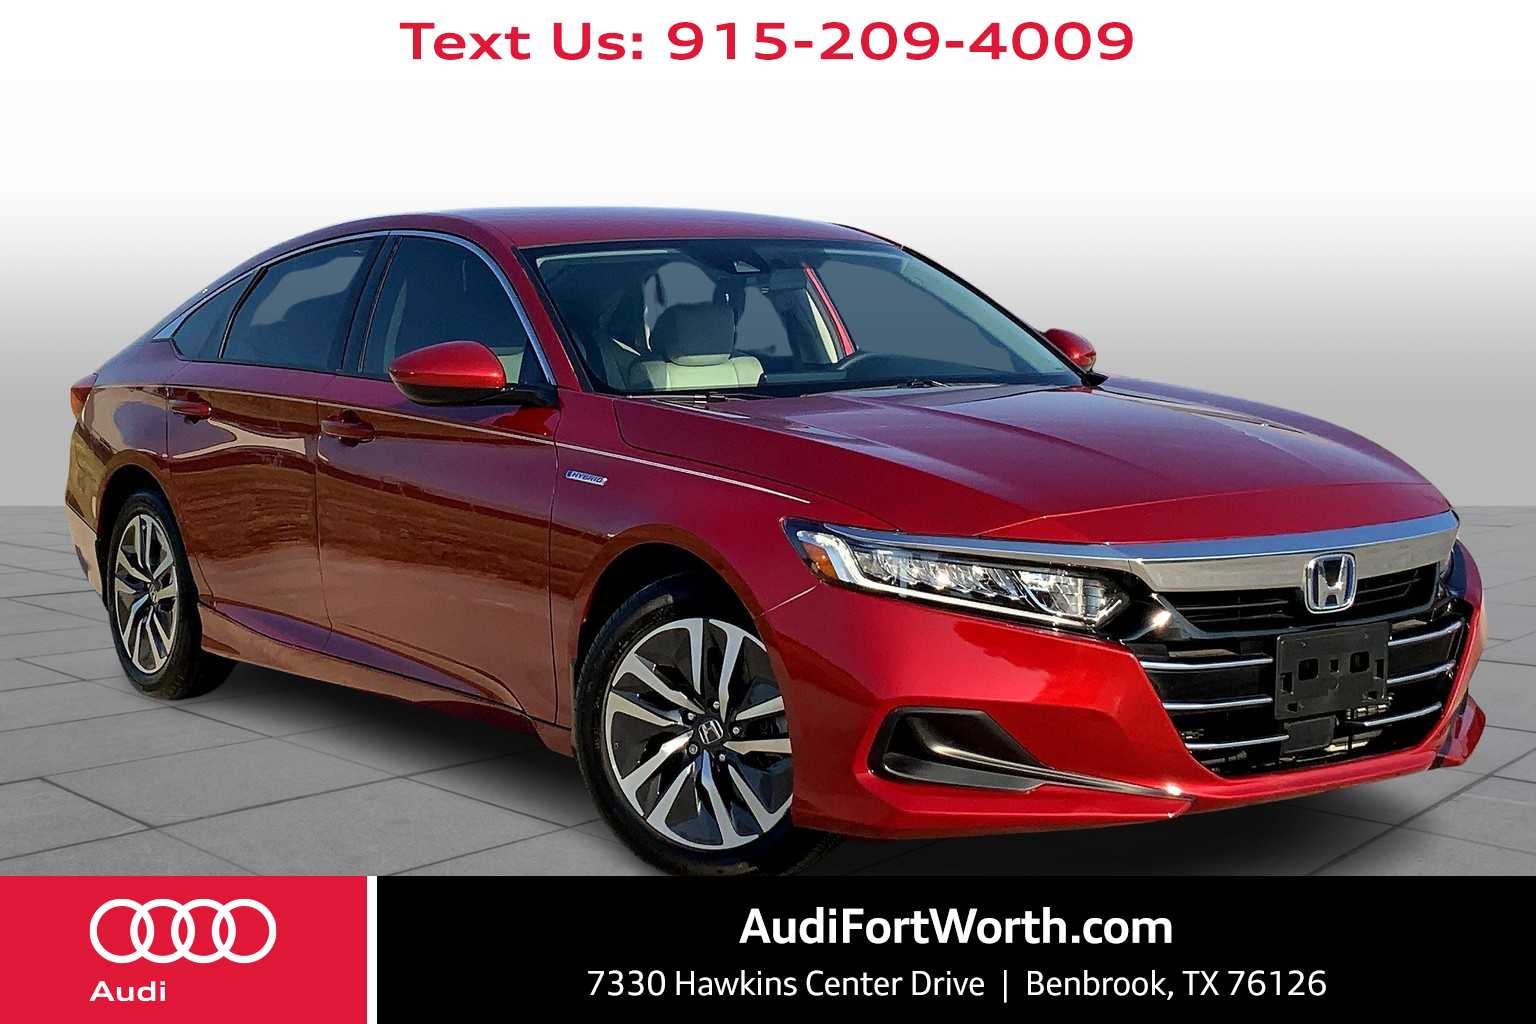 Used 2021 Honda Accord Hybrid with VIN 1HGCV3F19MA009605 for sale in Benbrook, TX